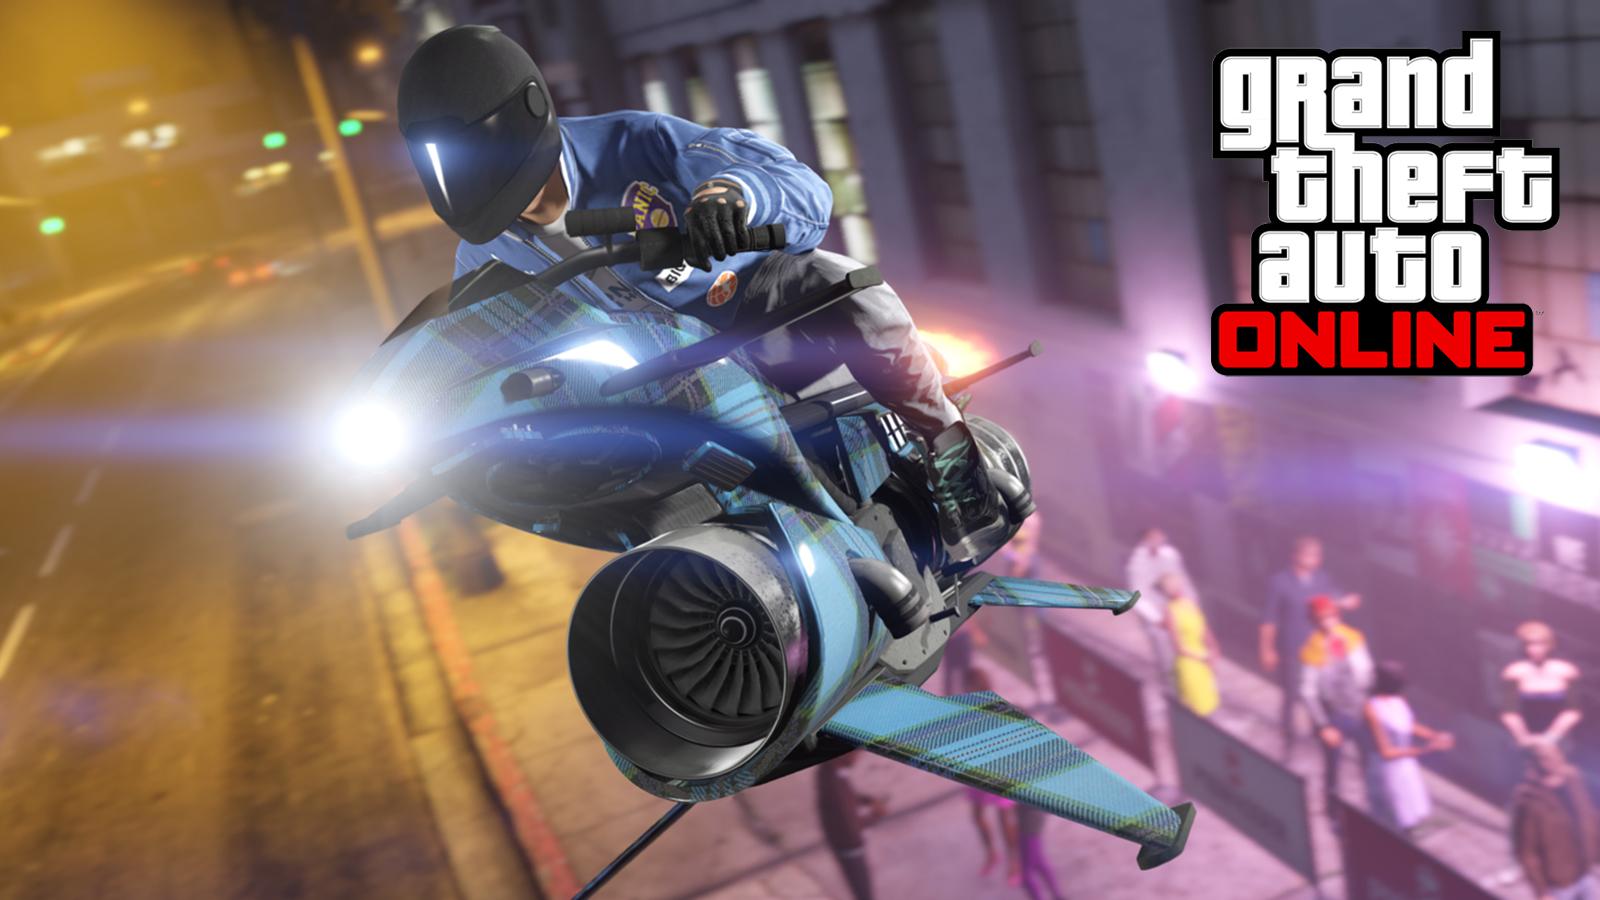 GTA Online MK2 Oppressor that can be used in a solo public session.